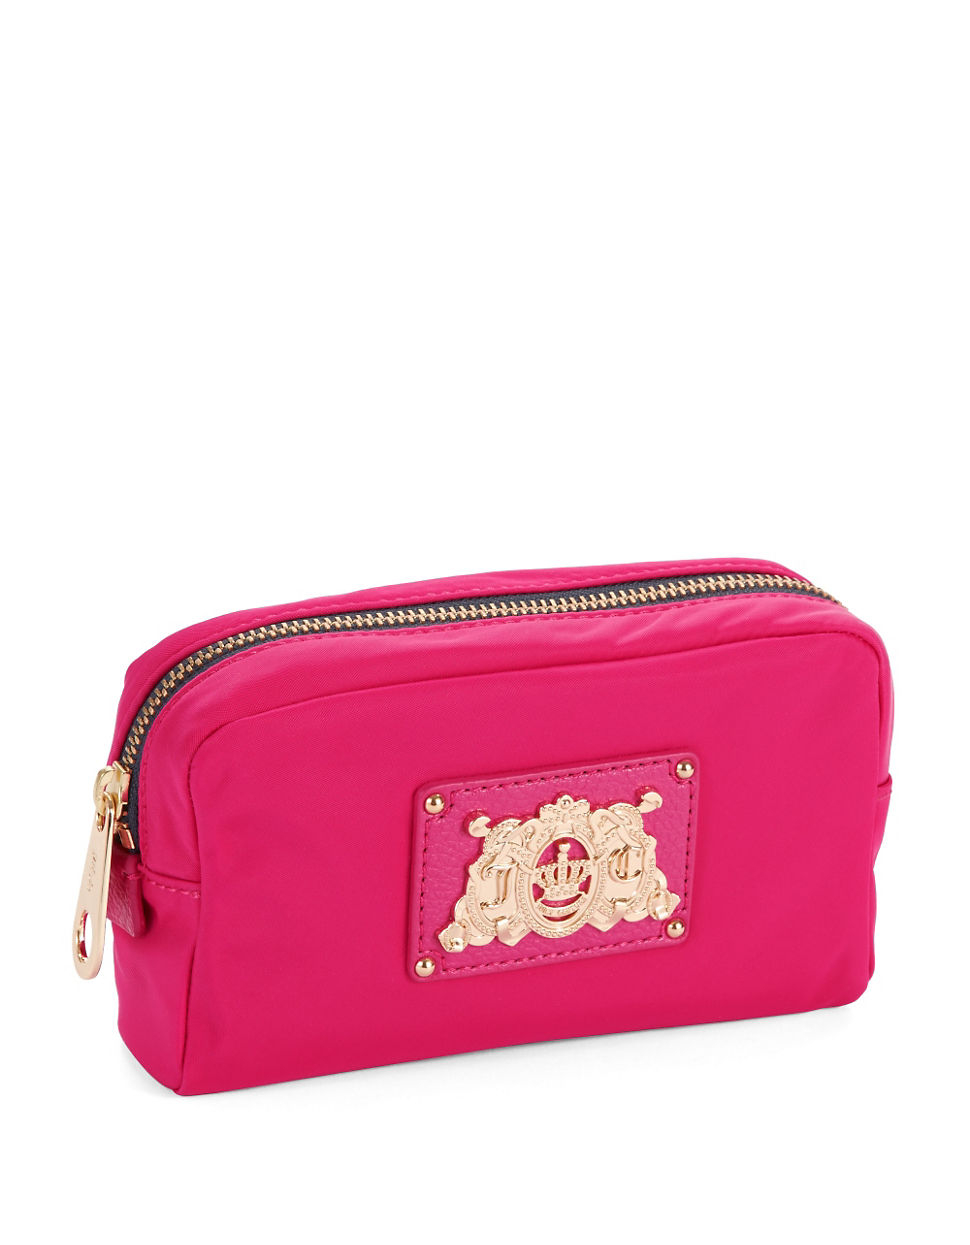 Lyst - Juicy couture Ez Cosmetic Bag in Pink